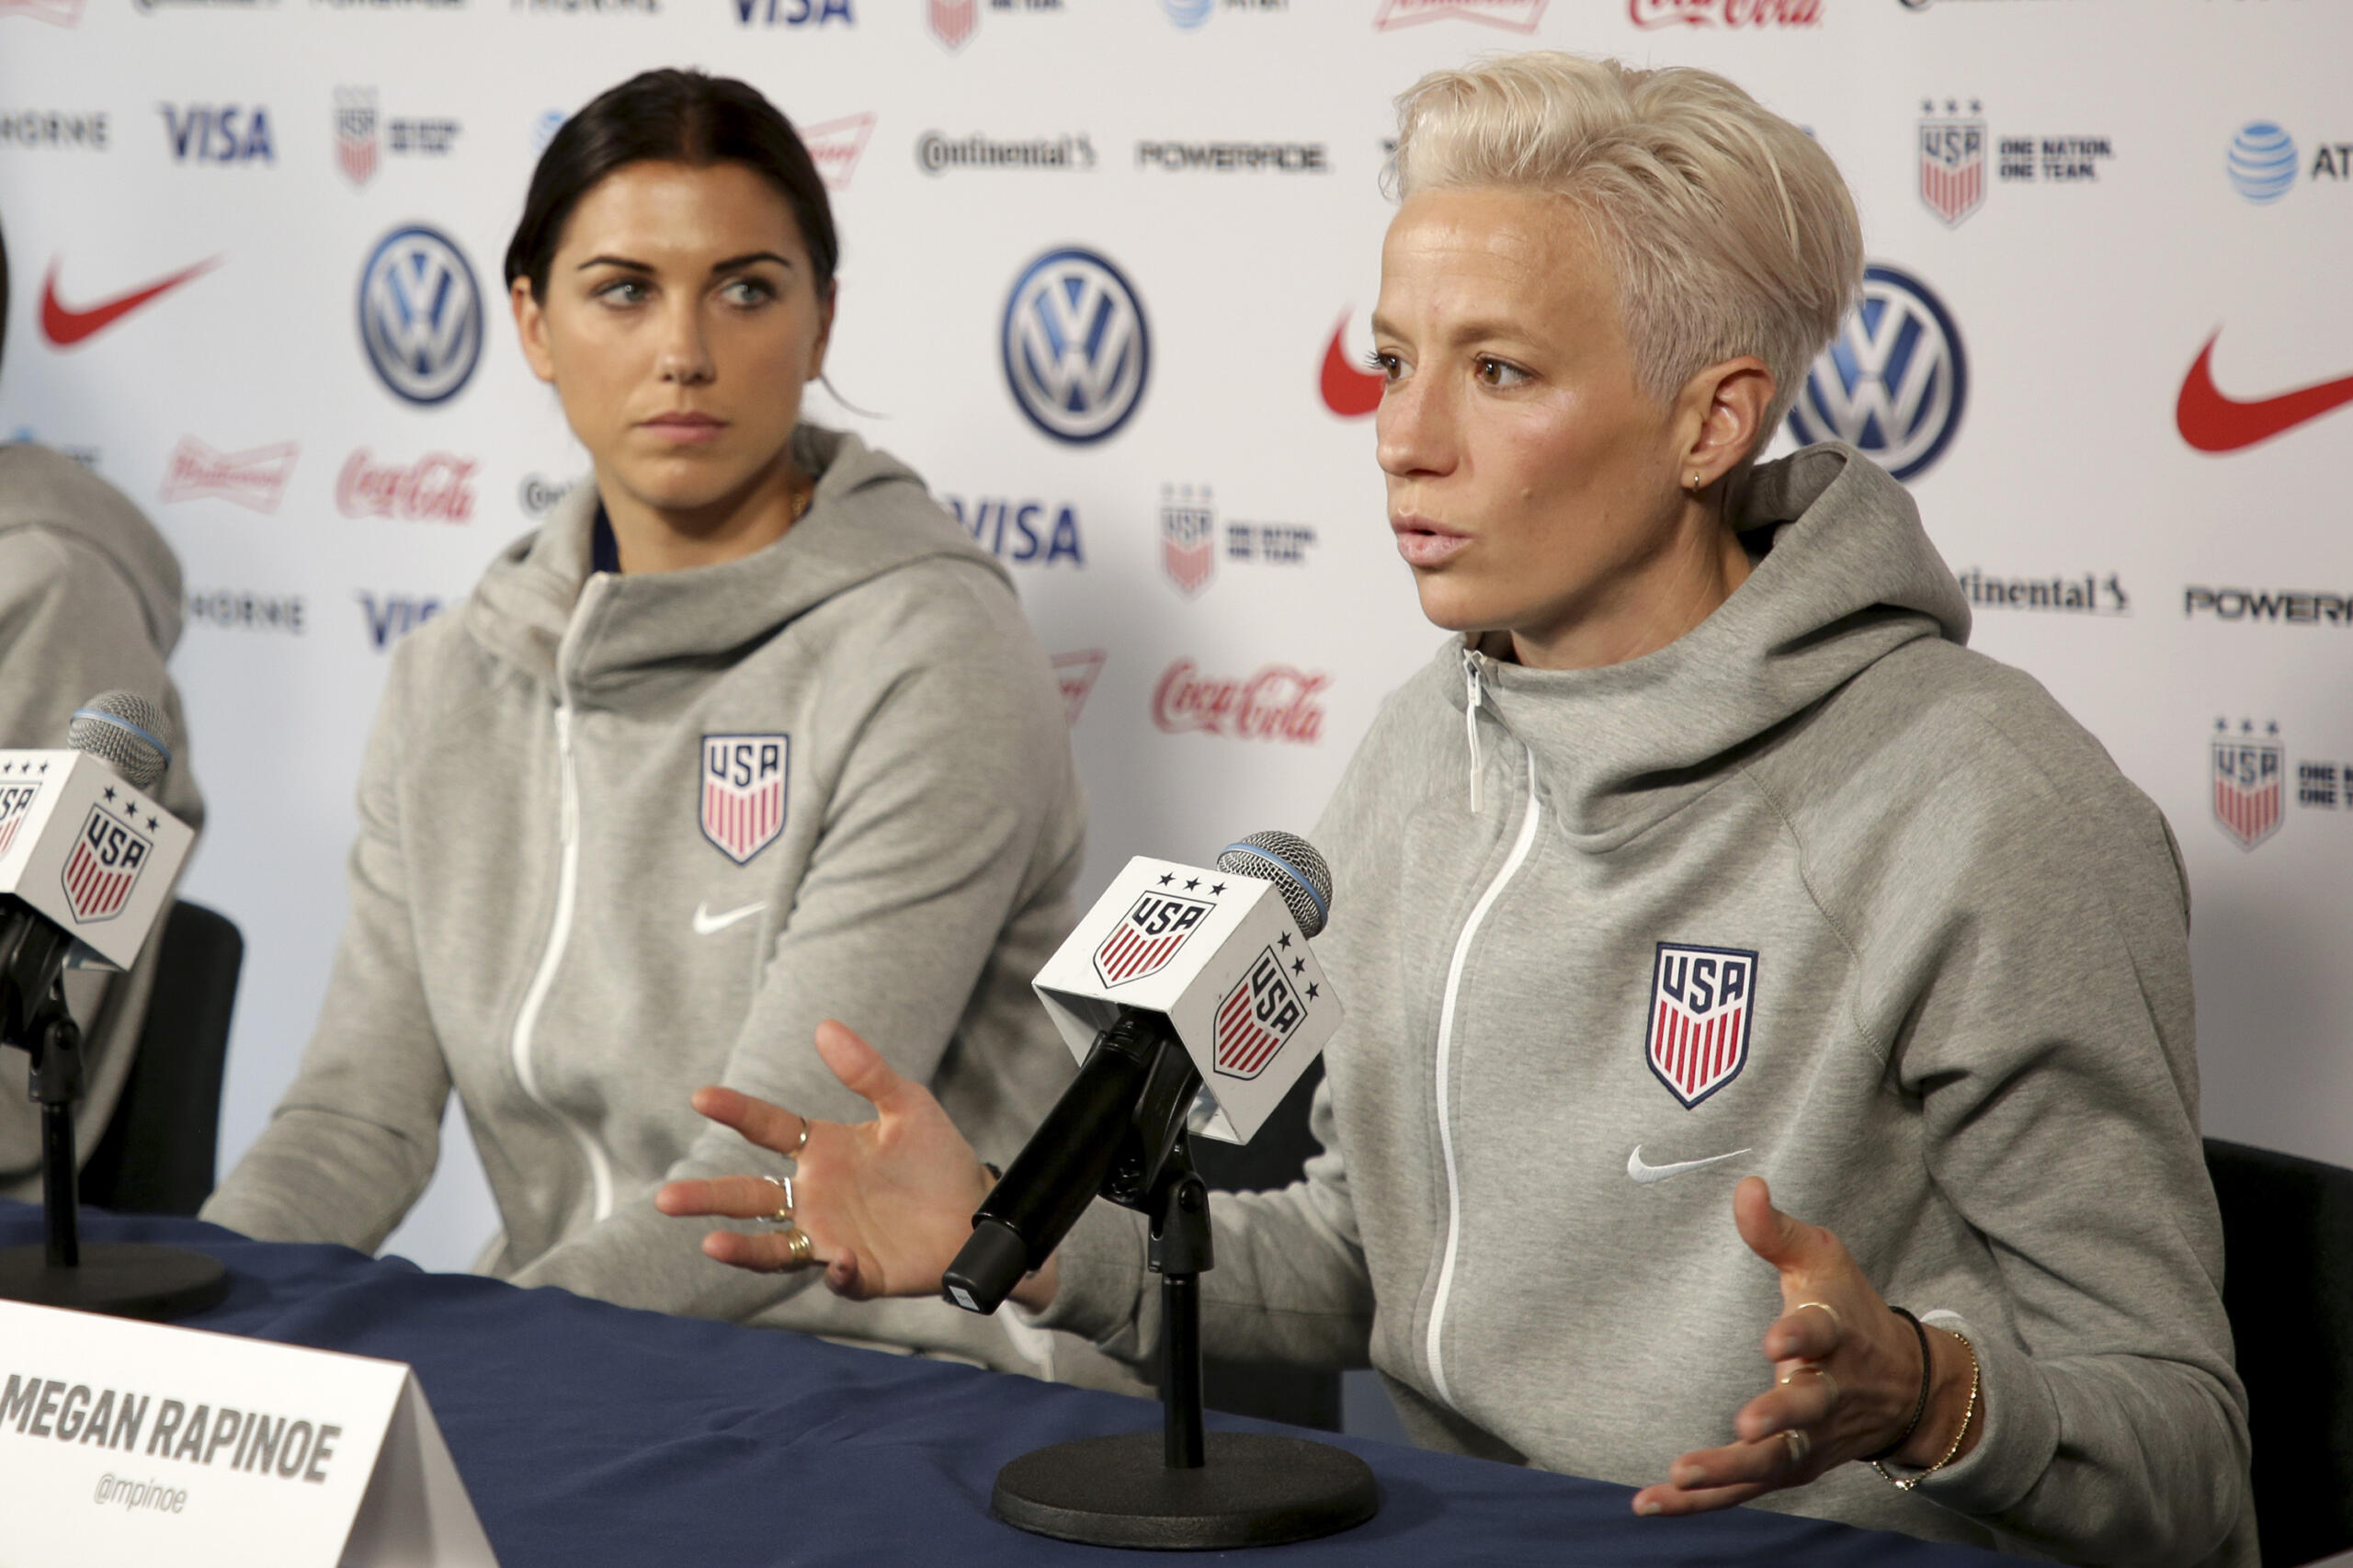 United States women's national soccer team members Alex Morgan, left, and Megan Rapinoe pictured at a 2019 press conference. U.S. women soccer players reached a landmark agreement with the sport’s American governing body to end a six-year legal battle over equal pay, a deal in which they are promised $24 million plus bonuses that match those of the men. The U.S. Soccer Federation and the women announced a deal Tuesday, Feb. 22, 2022, that will have players split $22 million, about one-third of what they had sought in damages.